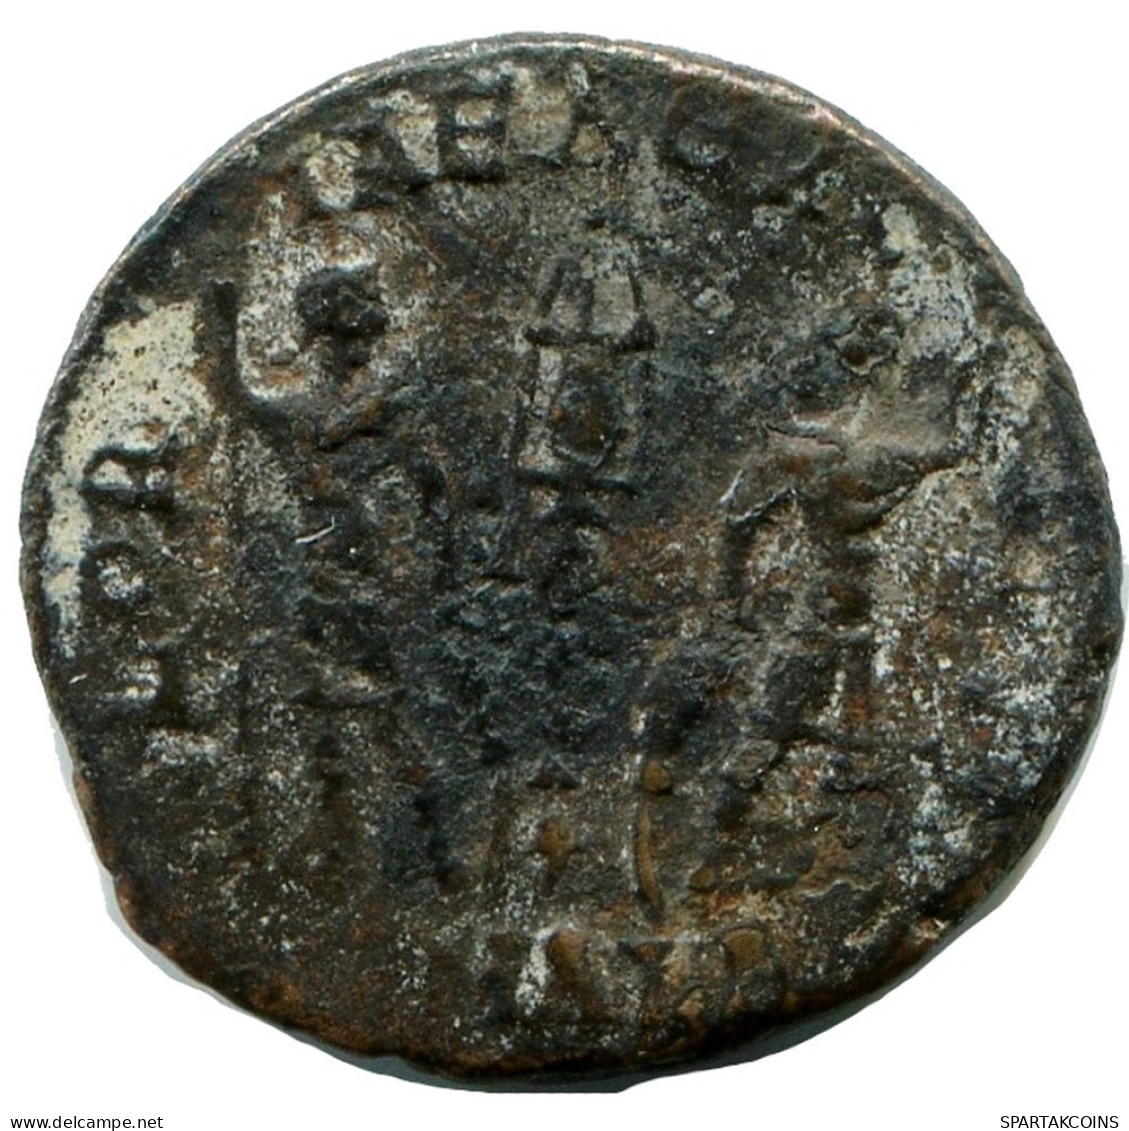 CONSTANS MINTED IN ALEKSANDRIA FOUND IN IHNASYAH HOARD EGYPT #ANC11349.14.D.A - El Imperio Christiano (307 / 363)